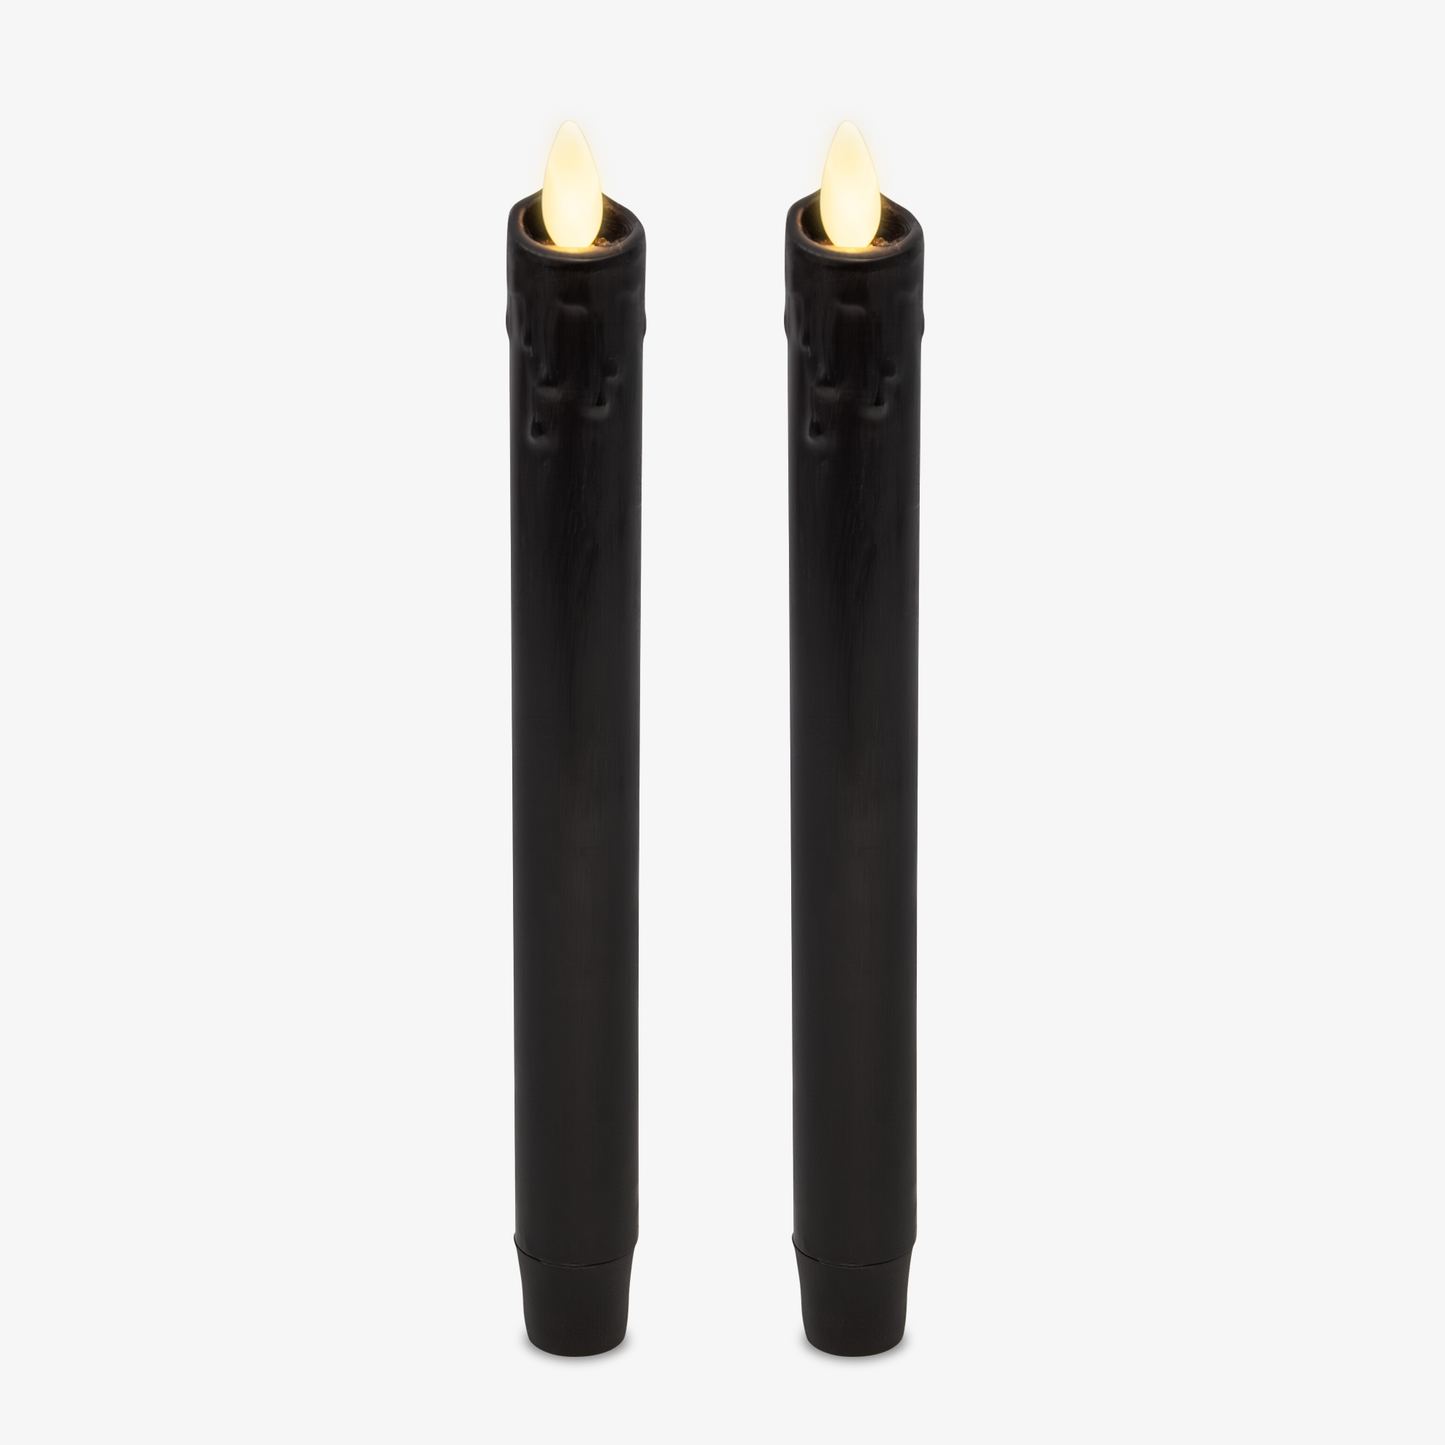 Set of 2 Black Wax Drip Flameless Candle Tapers - Scallop Top